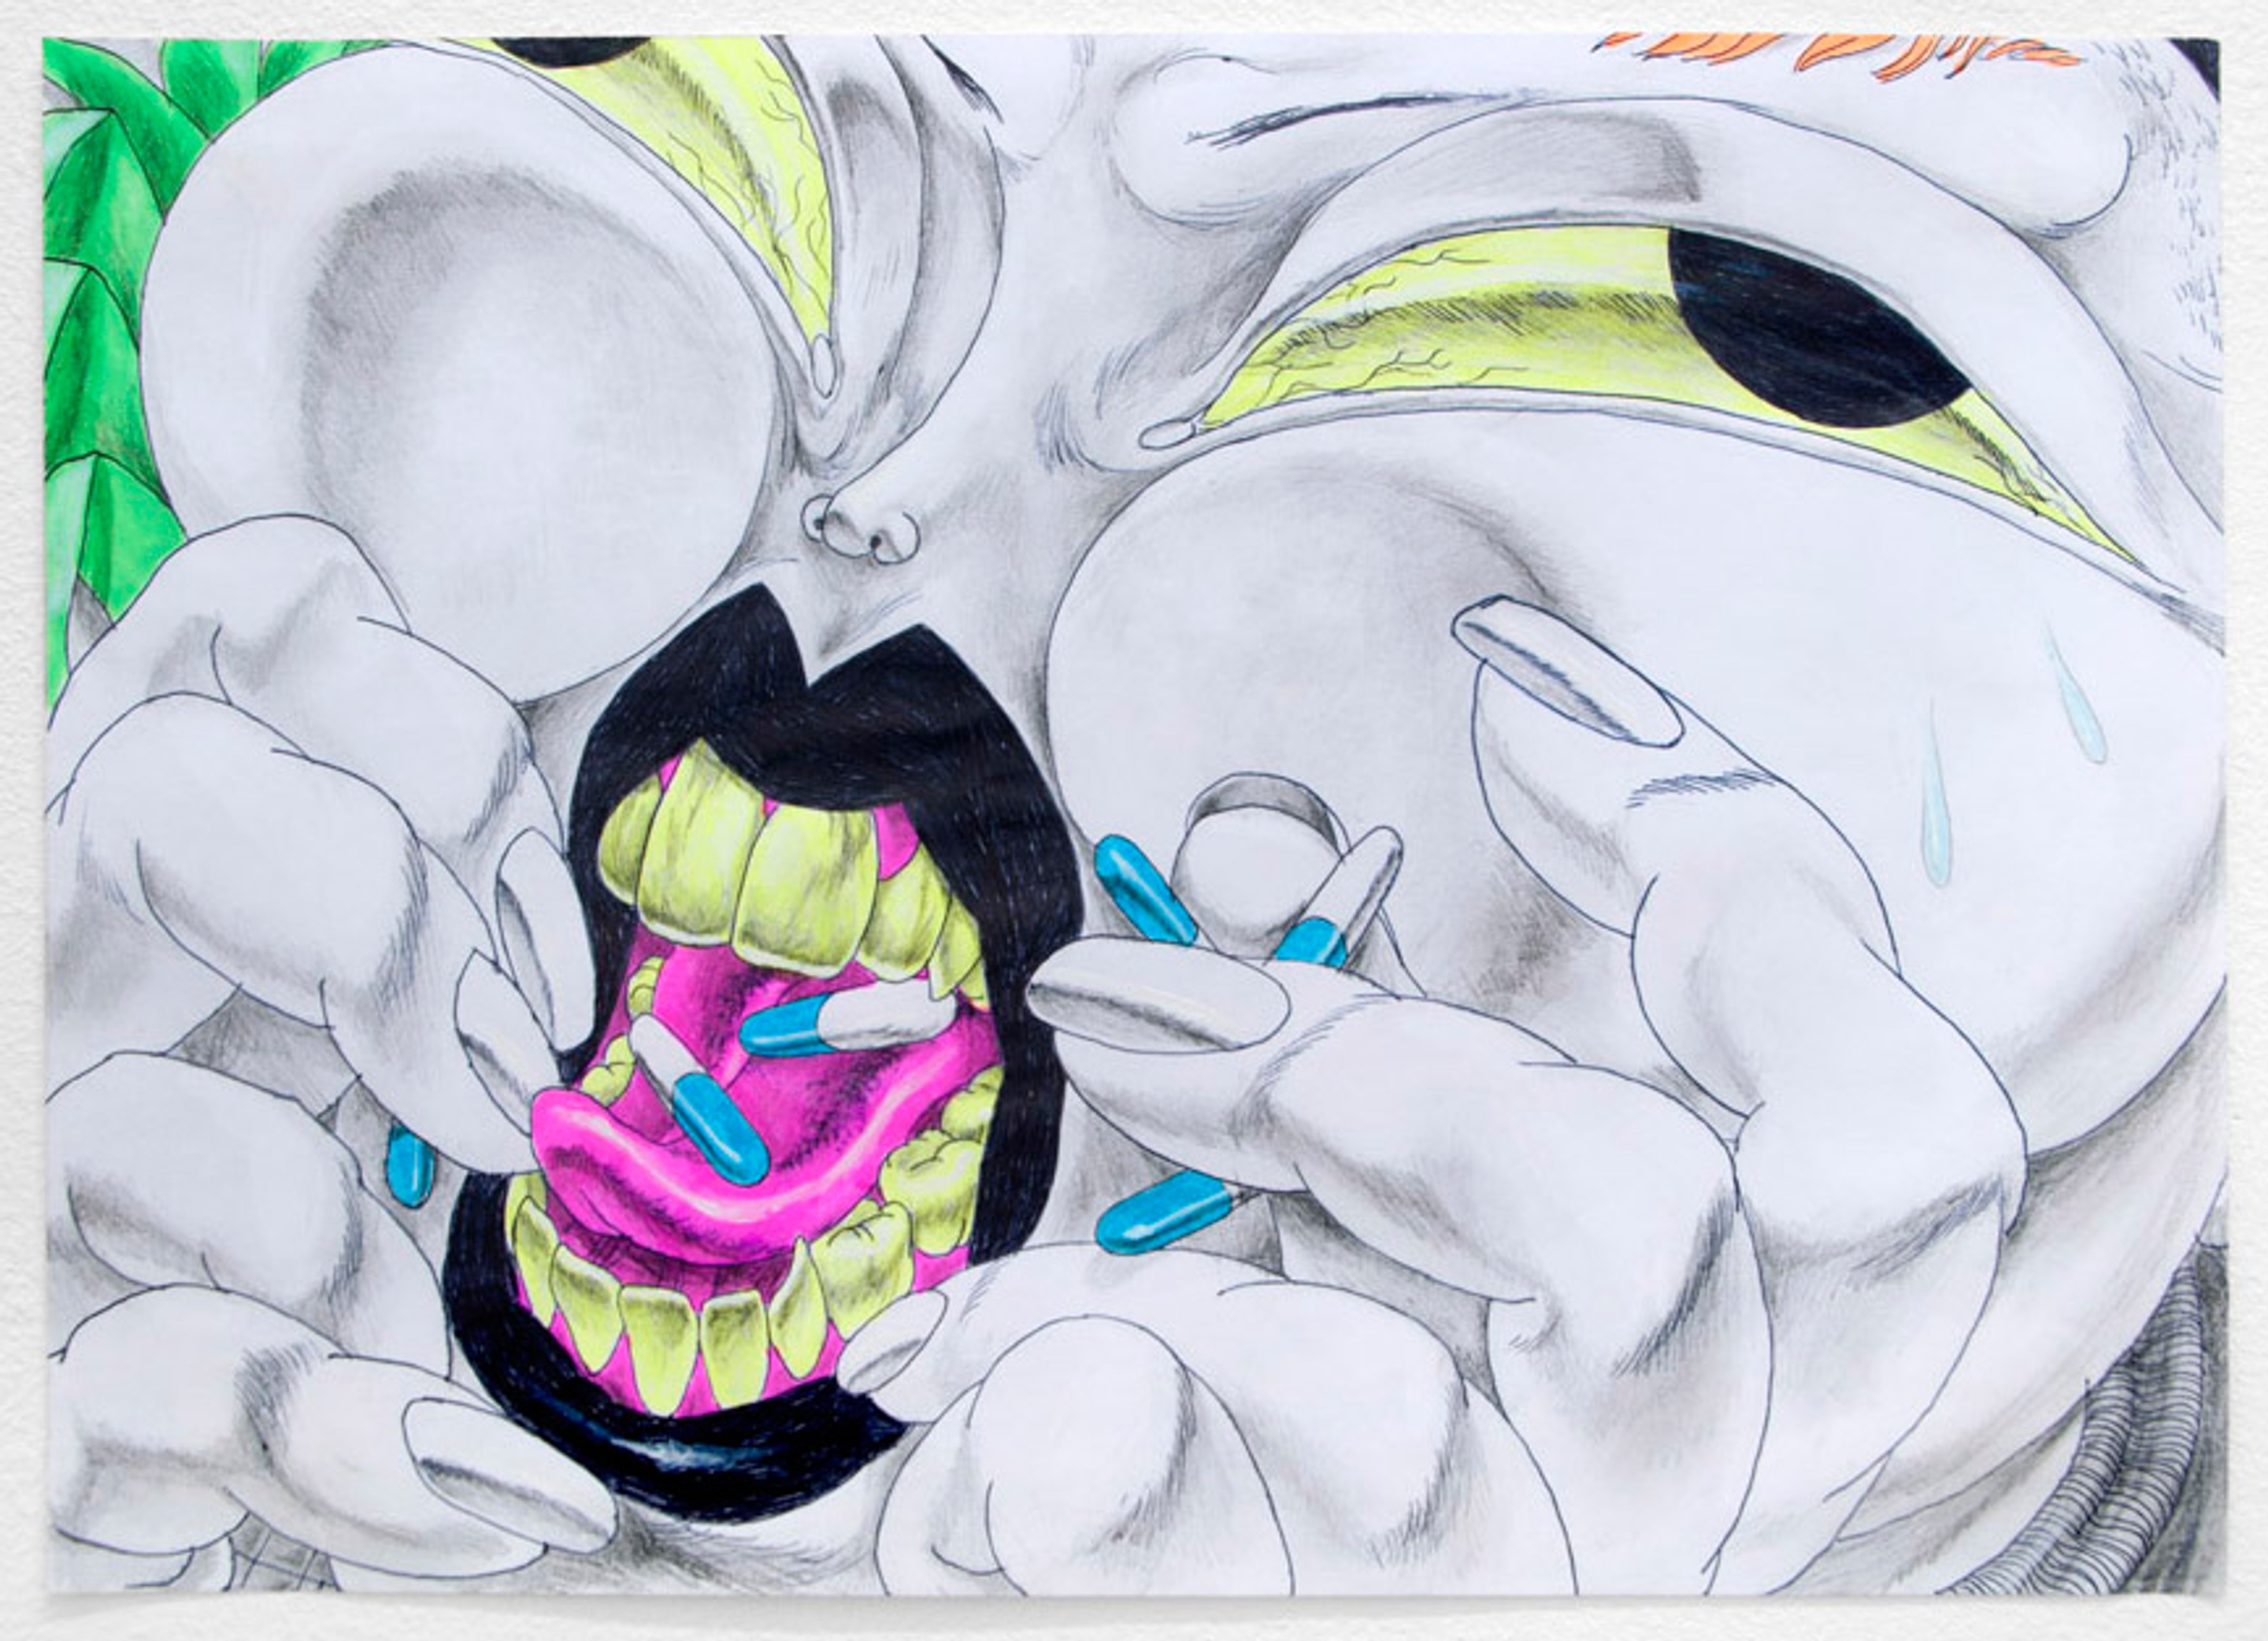 Untitled , 2014
Acrylic, ballpoint pen, pencil, charcoal pencil and flourescent
11 x 8.5 inches